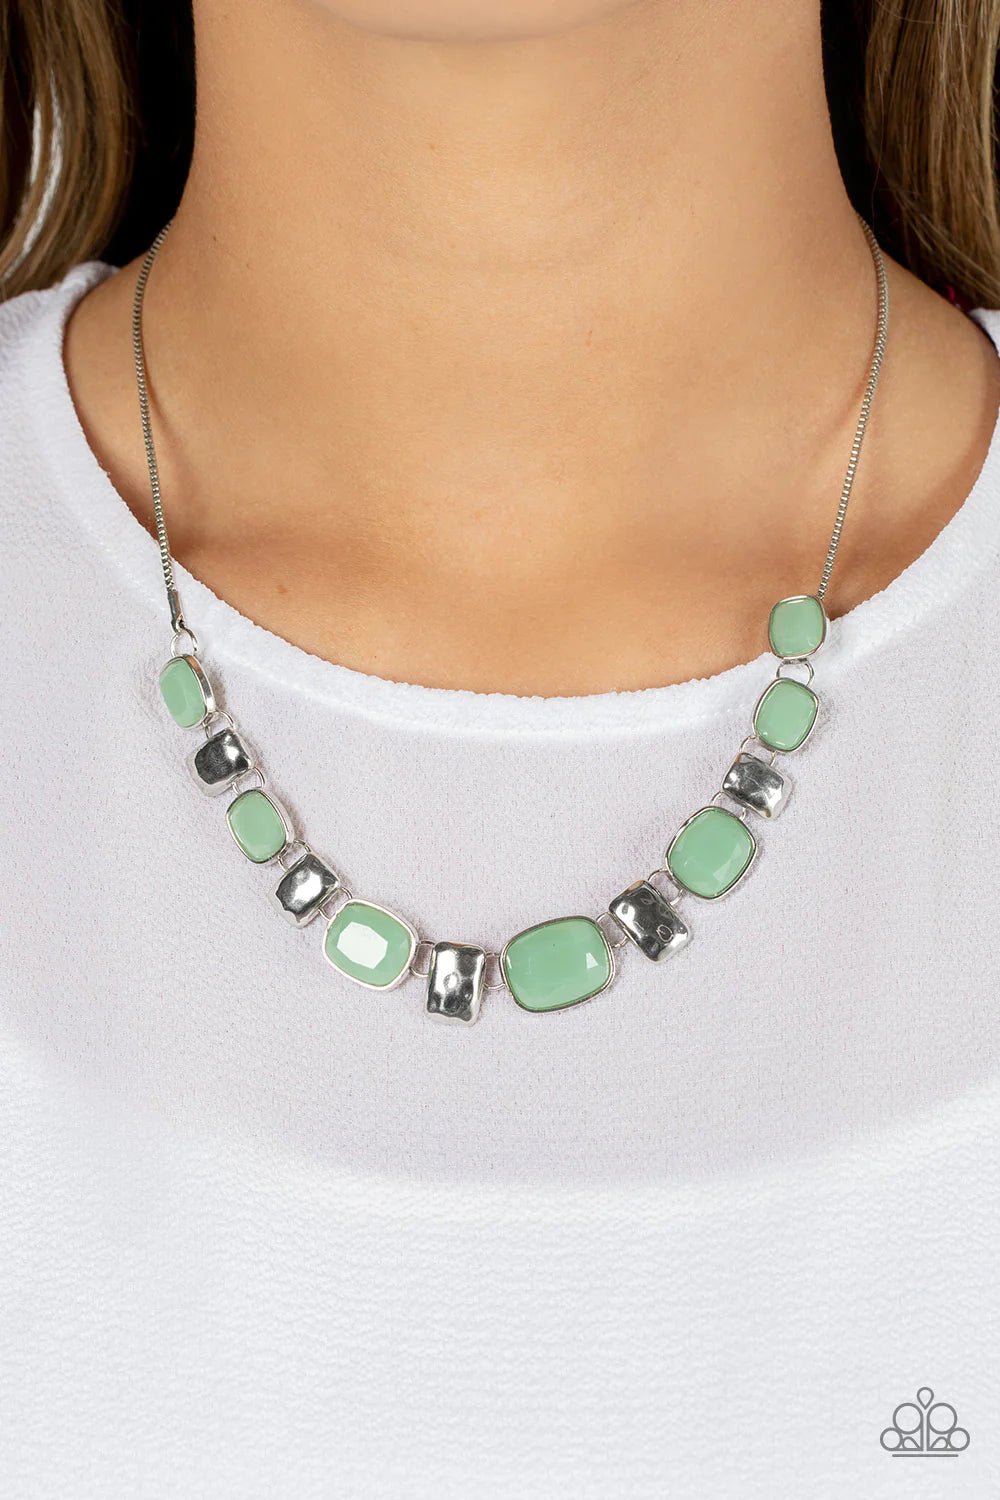 Paparazzi Accessories Polished Parade - Green Rounded rectangular beads in a vibrant Loden Frost hue are pressed into silver frames, showcasing their faceted surfaces as they crawl along the collar. Small silver, rectangular plates, hammered in subtle tex